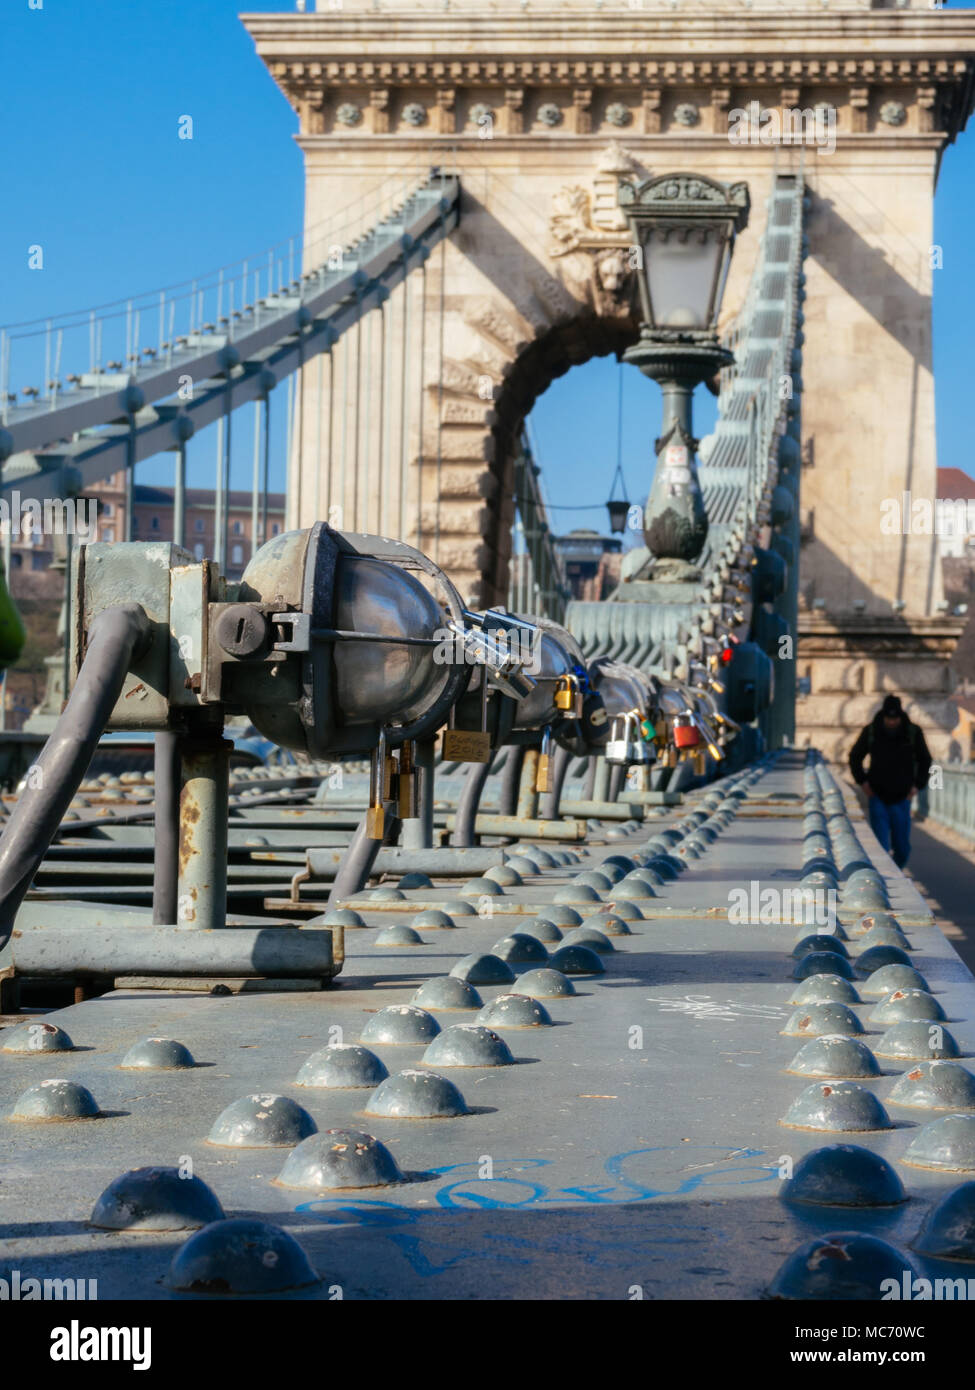 Chain Bridge over the Danube in Budapest, Hungary with some padlocks in focus Stock Photo